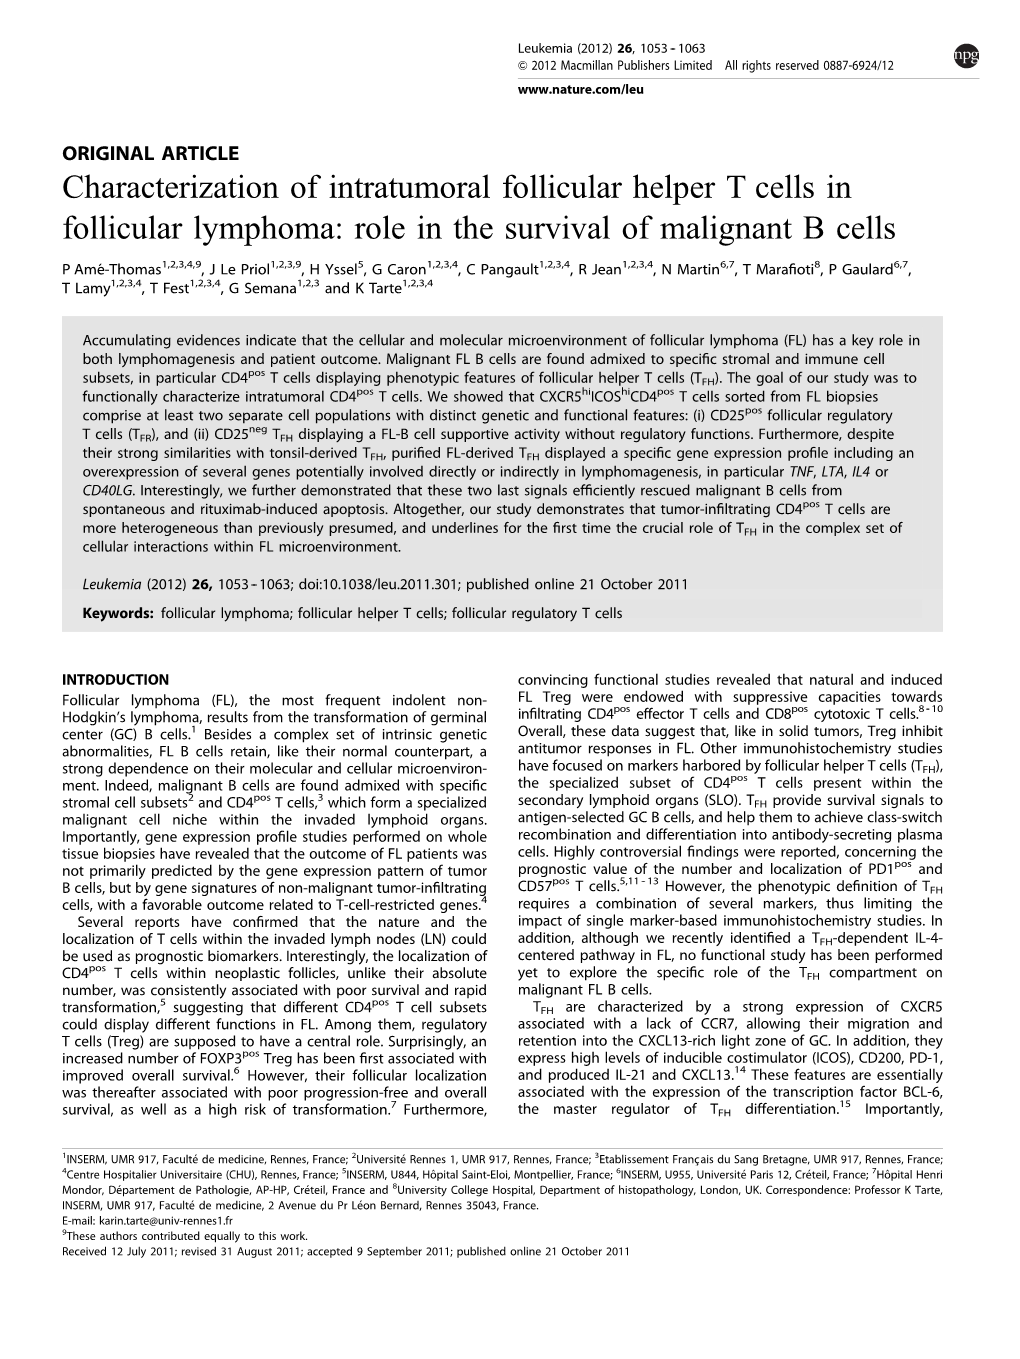 Characterization of Intratumoral Follicular Helper T Cells in Follicular Lymphoma: Role in the Survival of Malignant B Cells